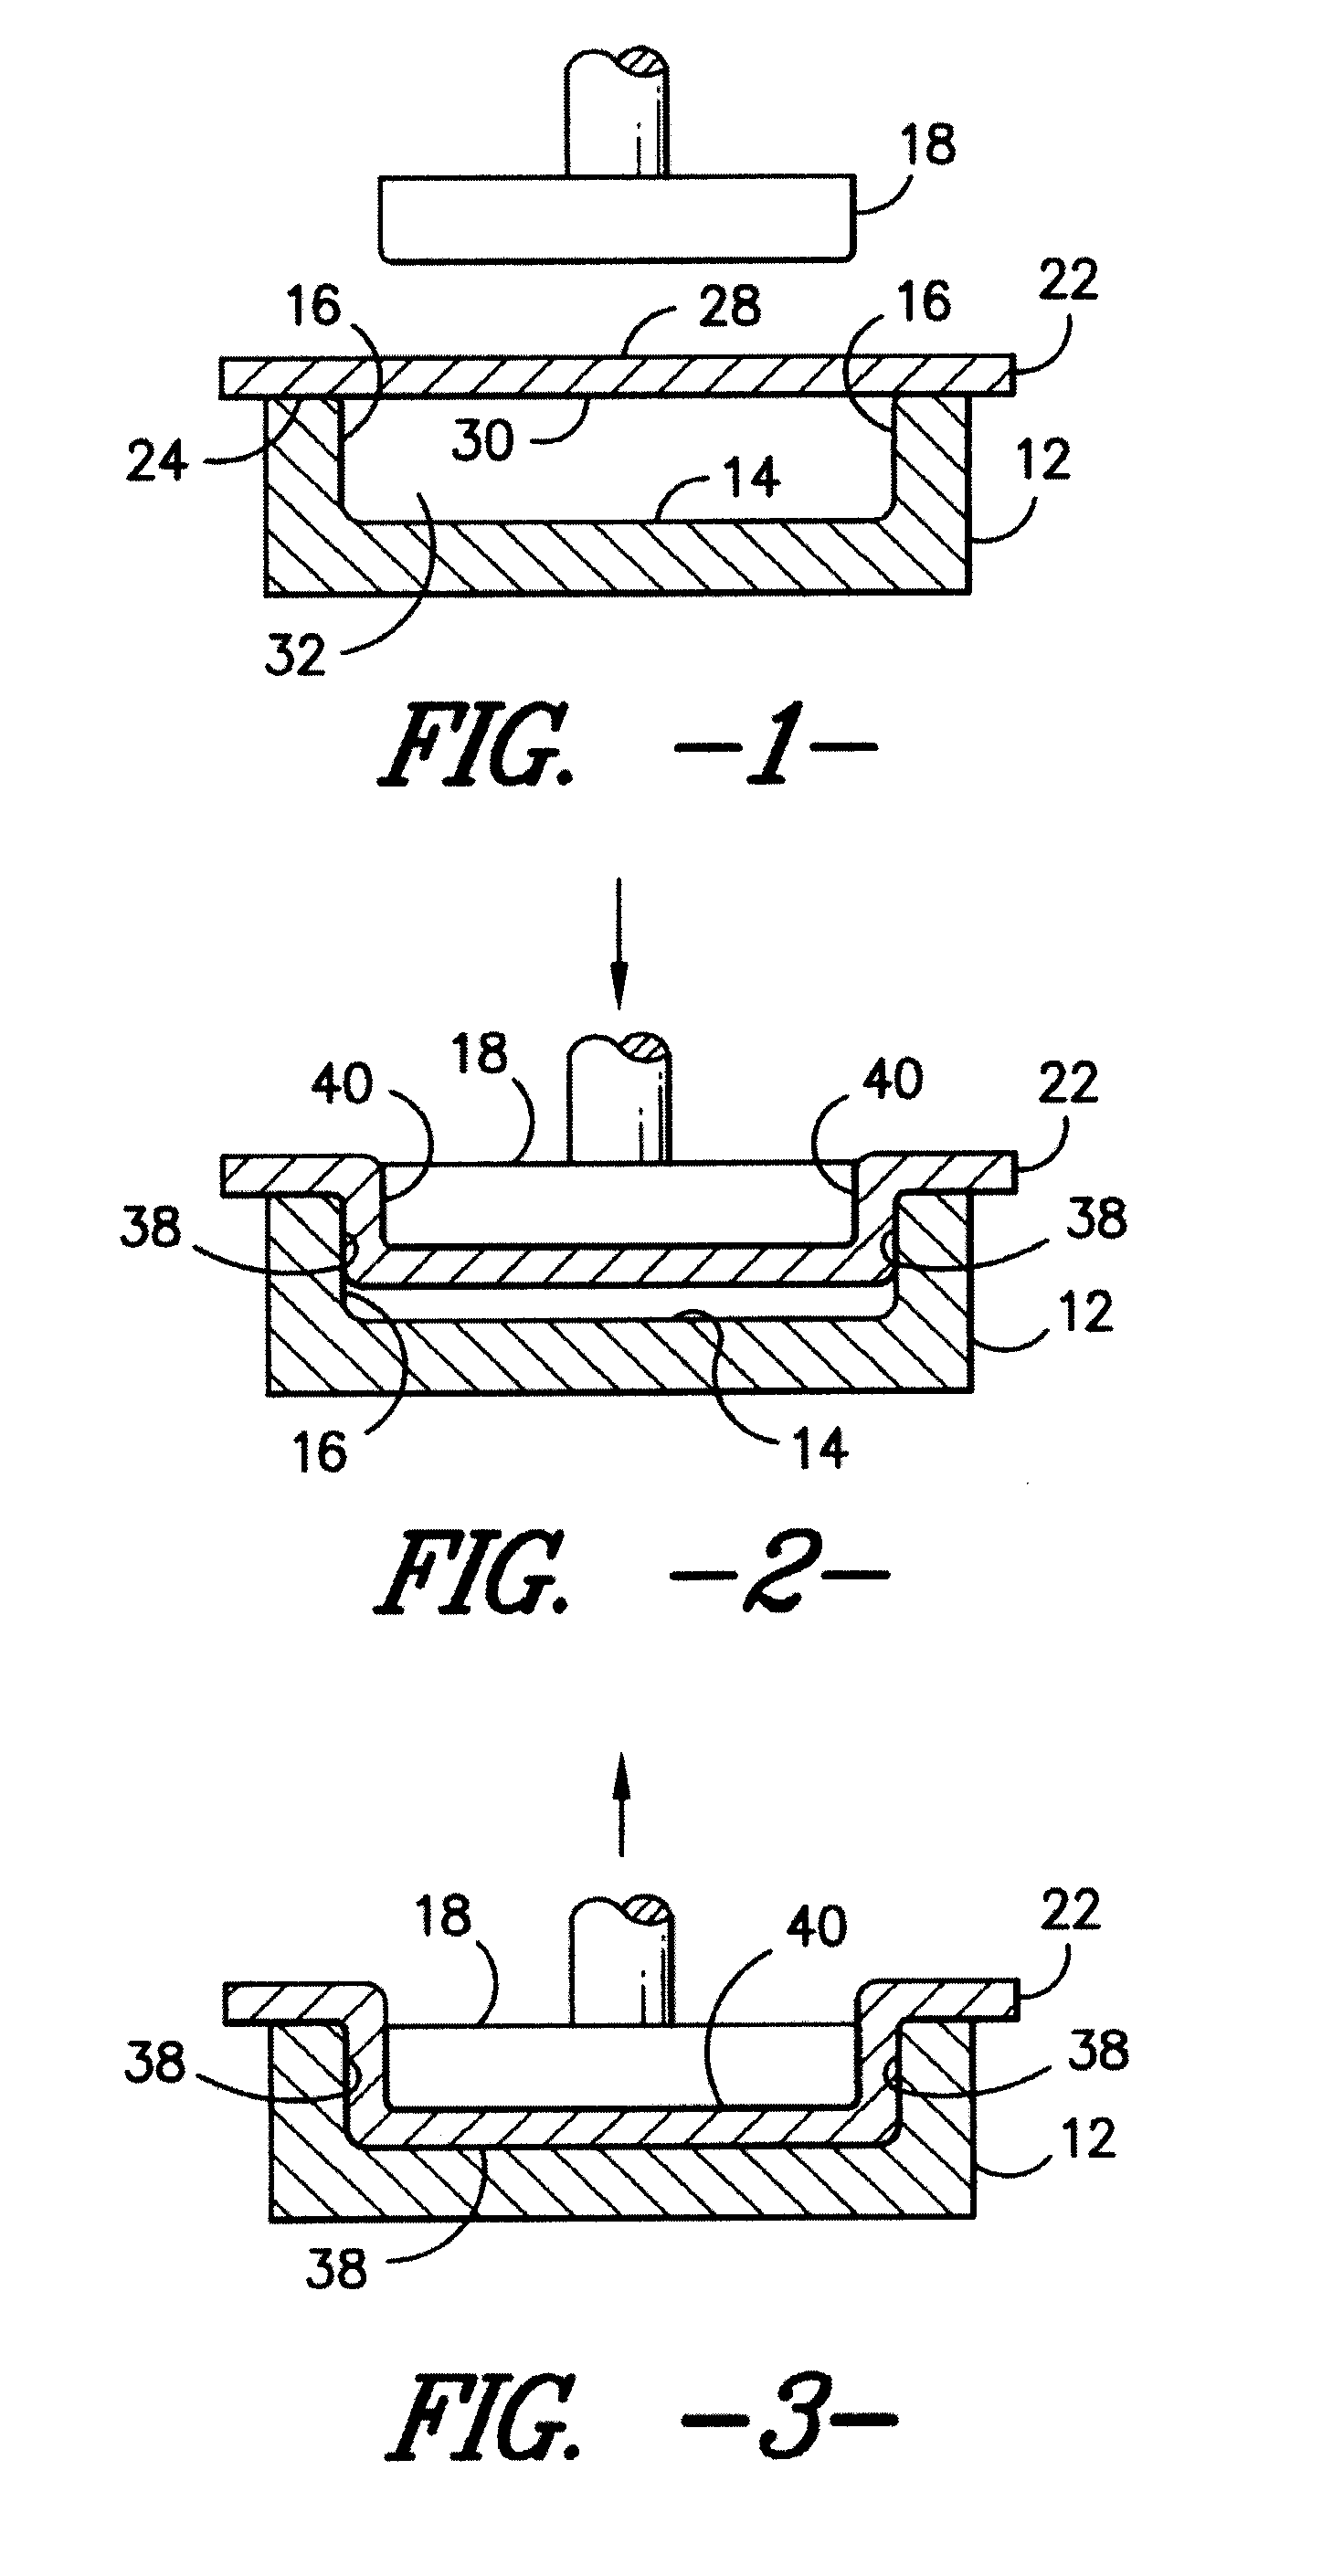 Lubricant formulation for high temperature metal forming processes